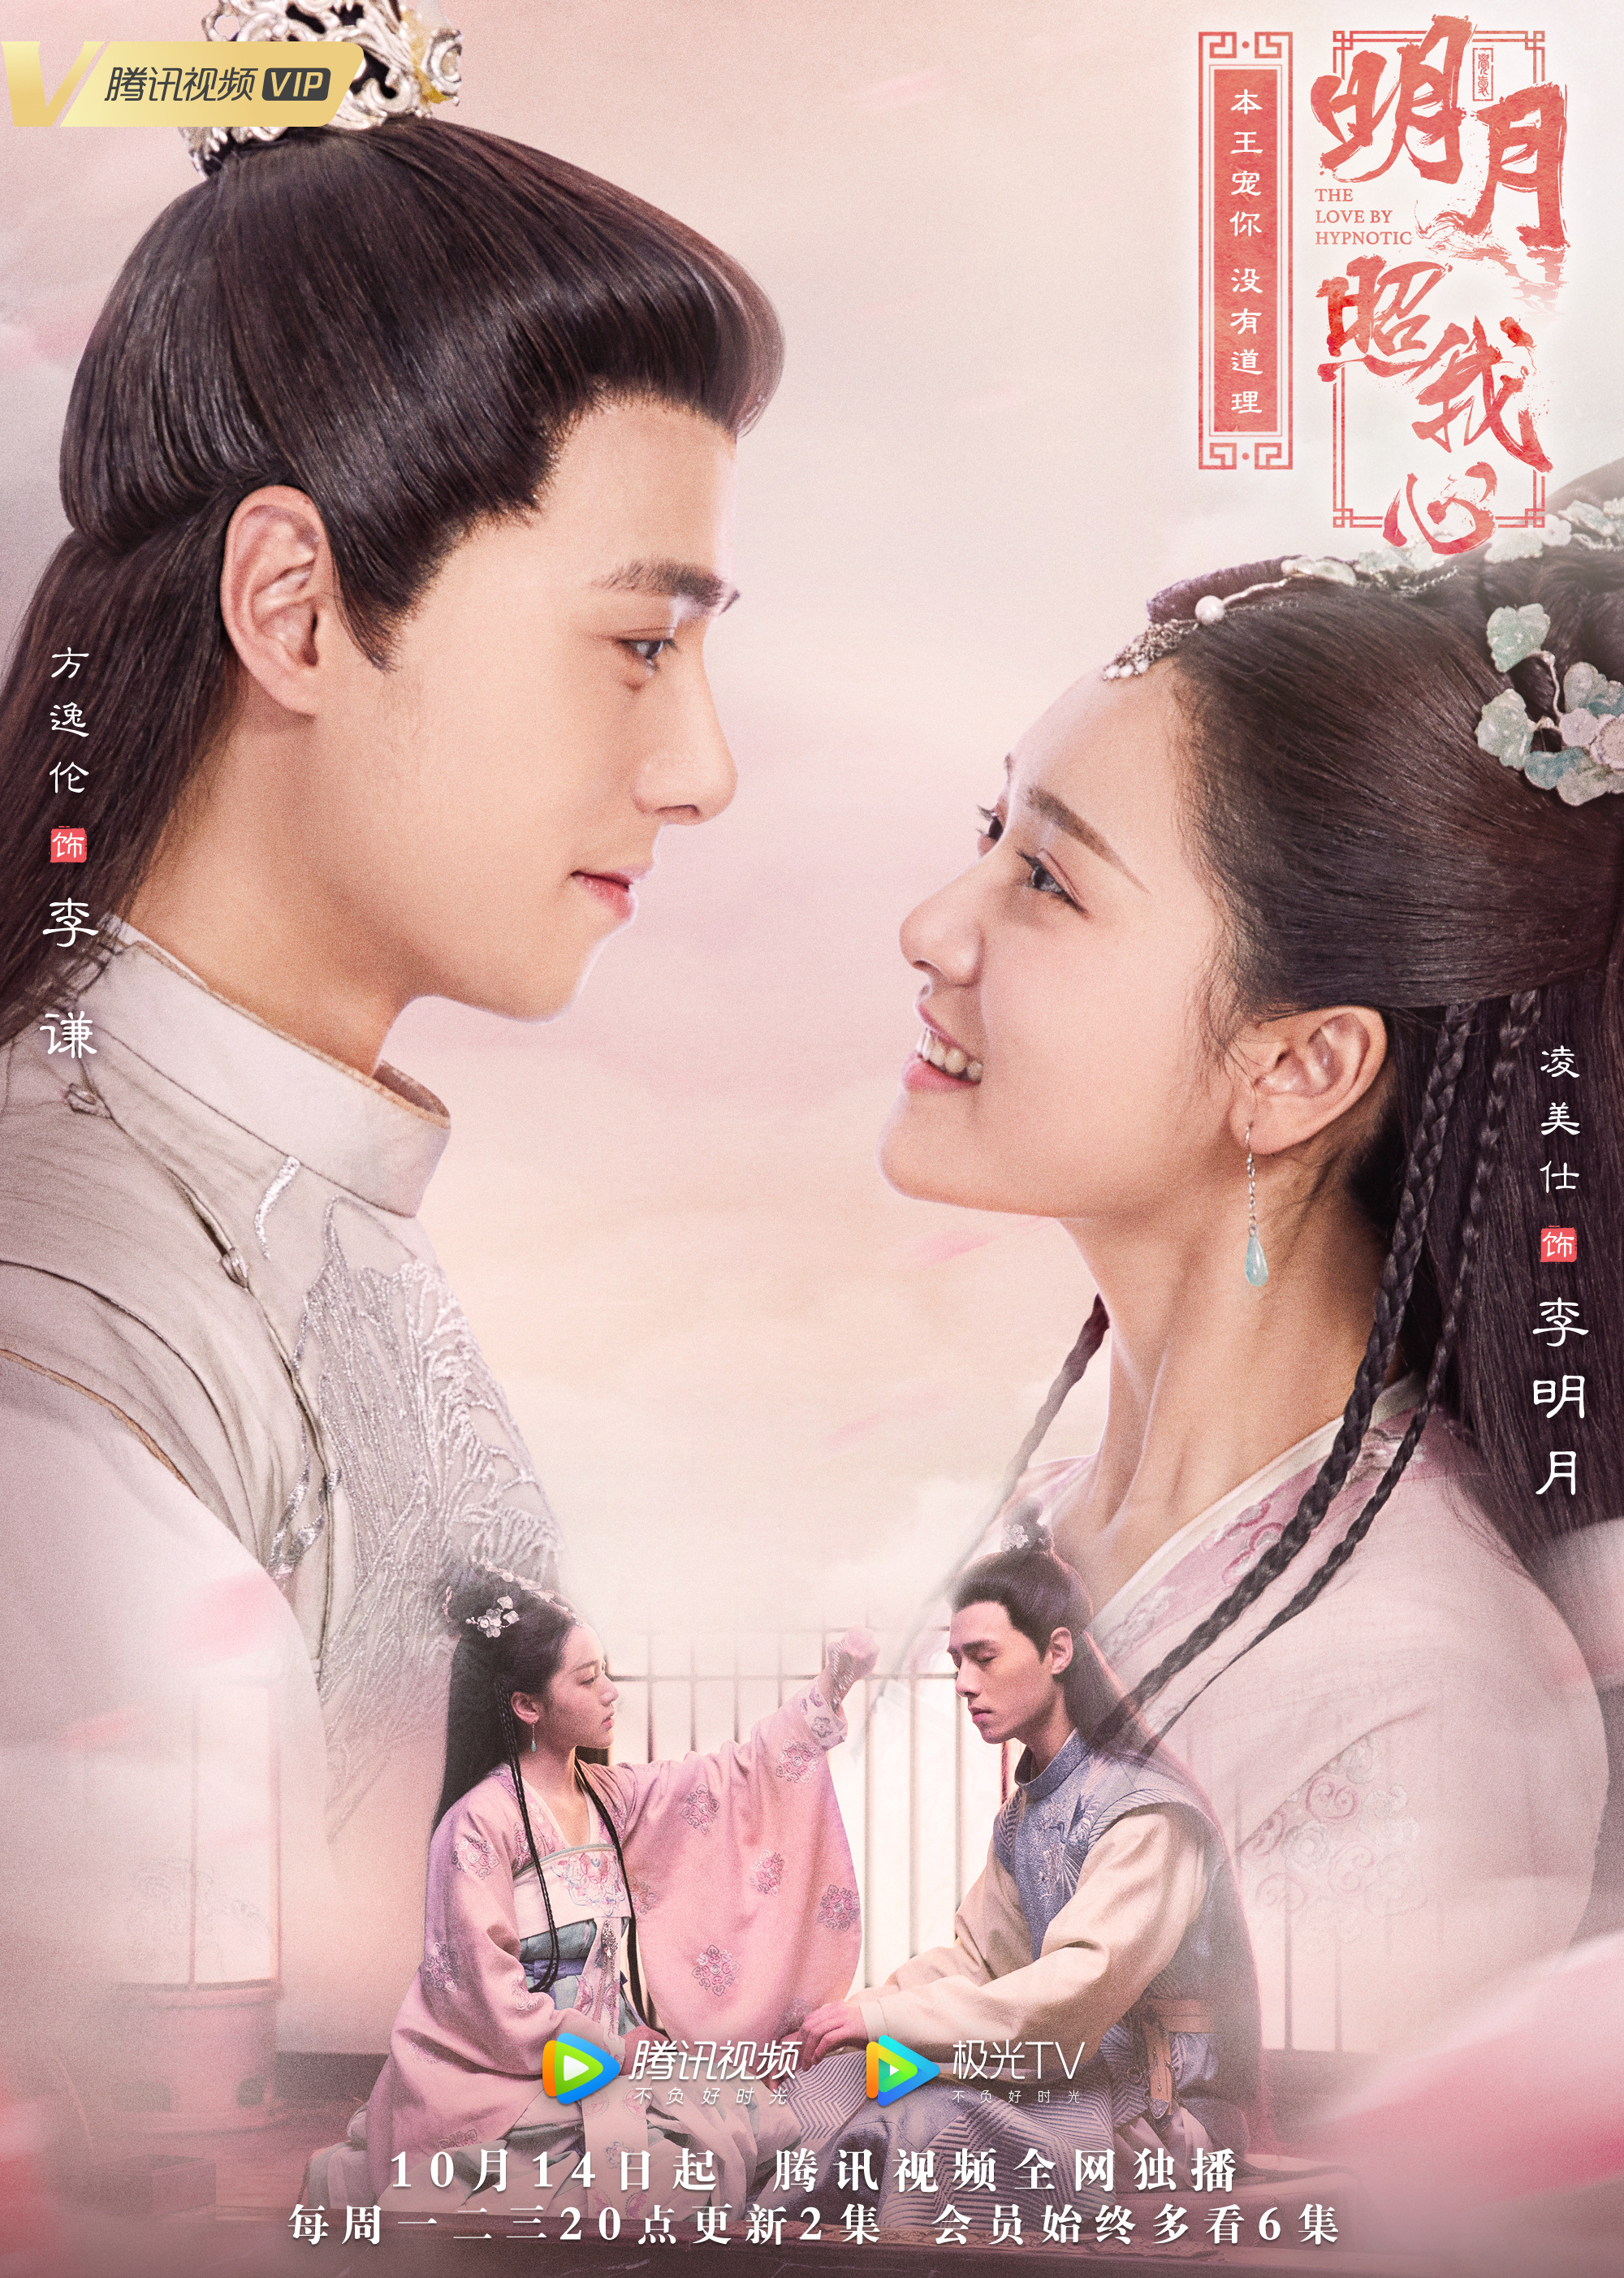 the love of hypnosis chinese drama ep 1 eng sub